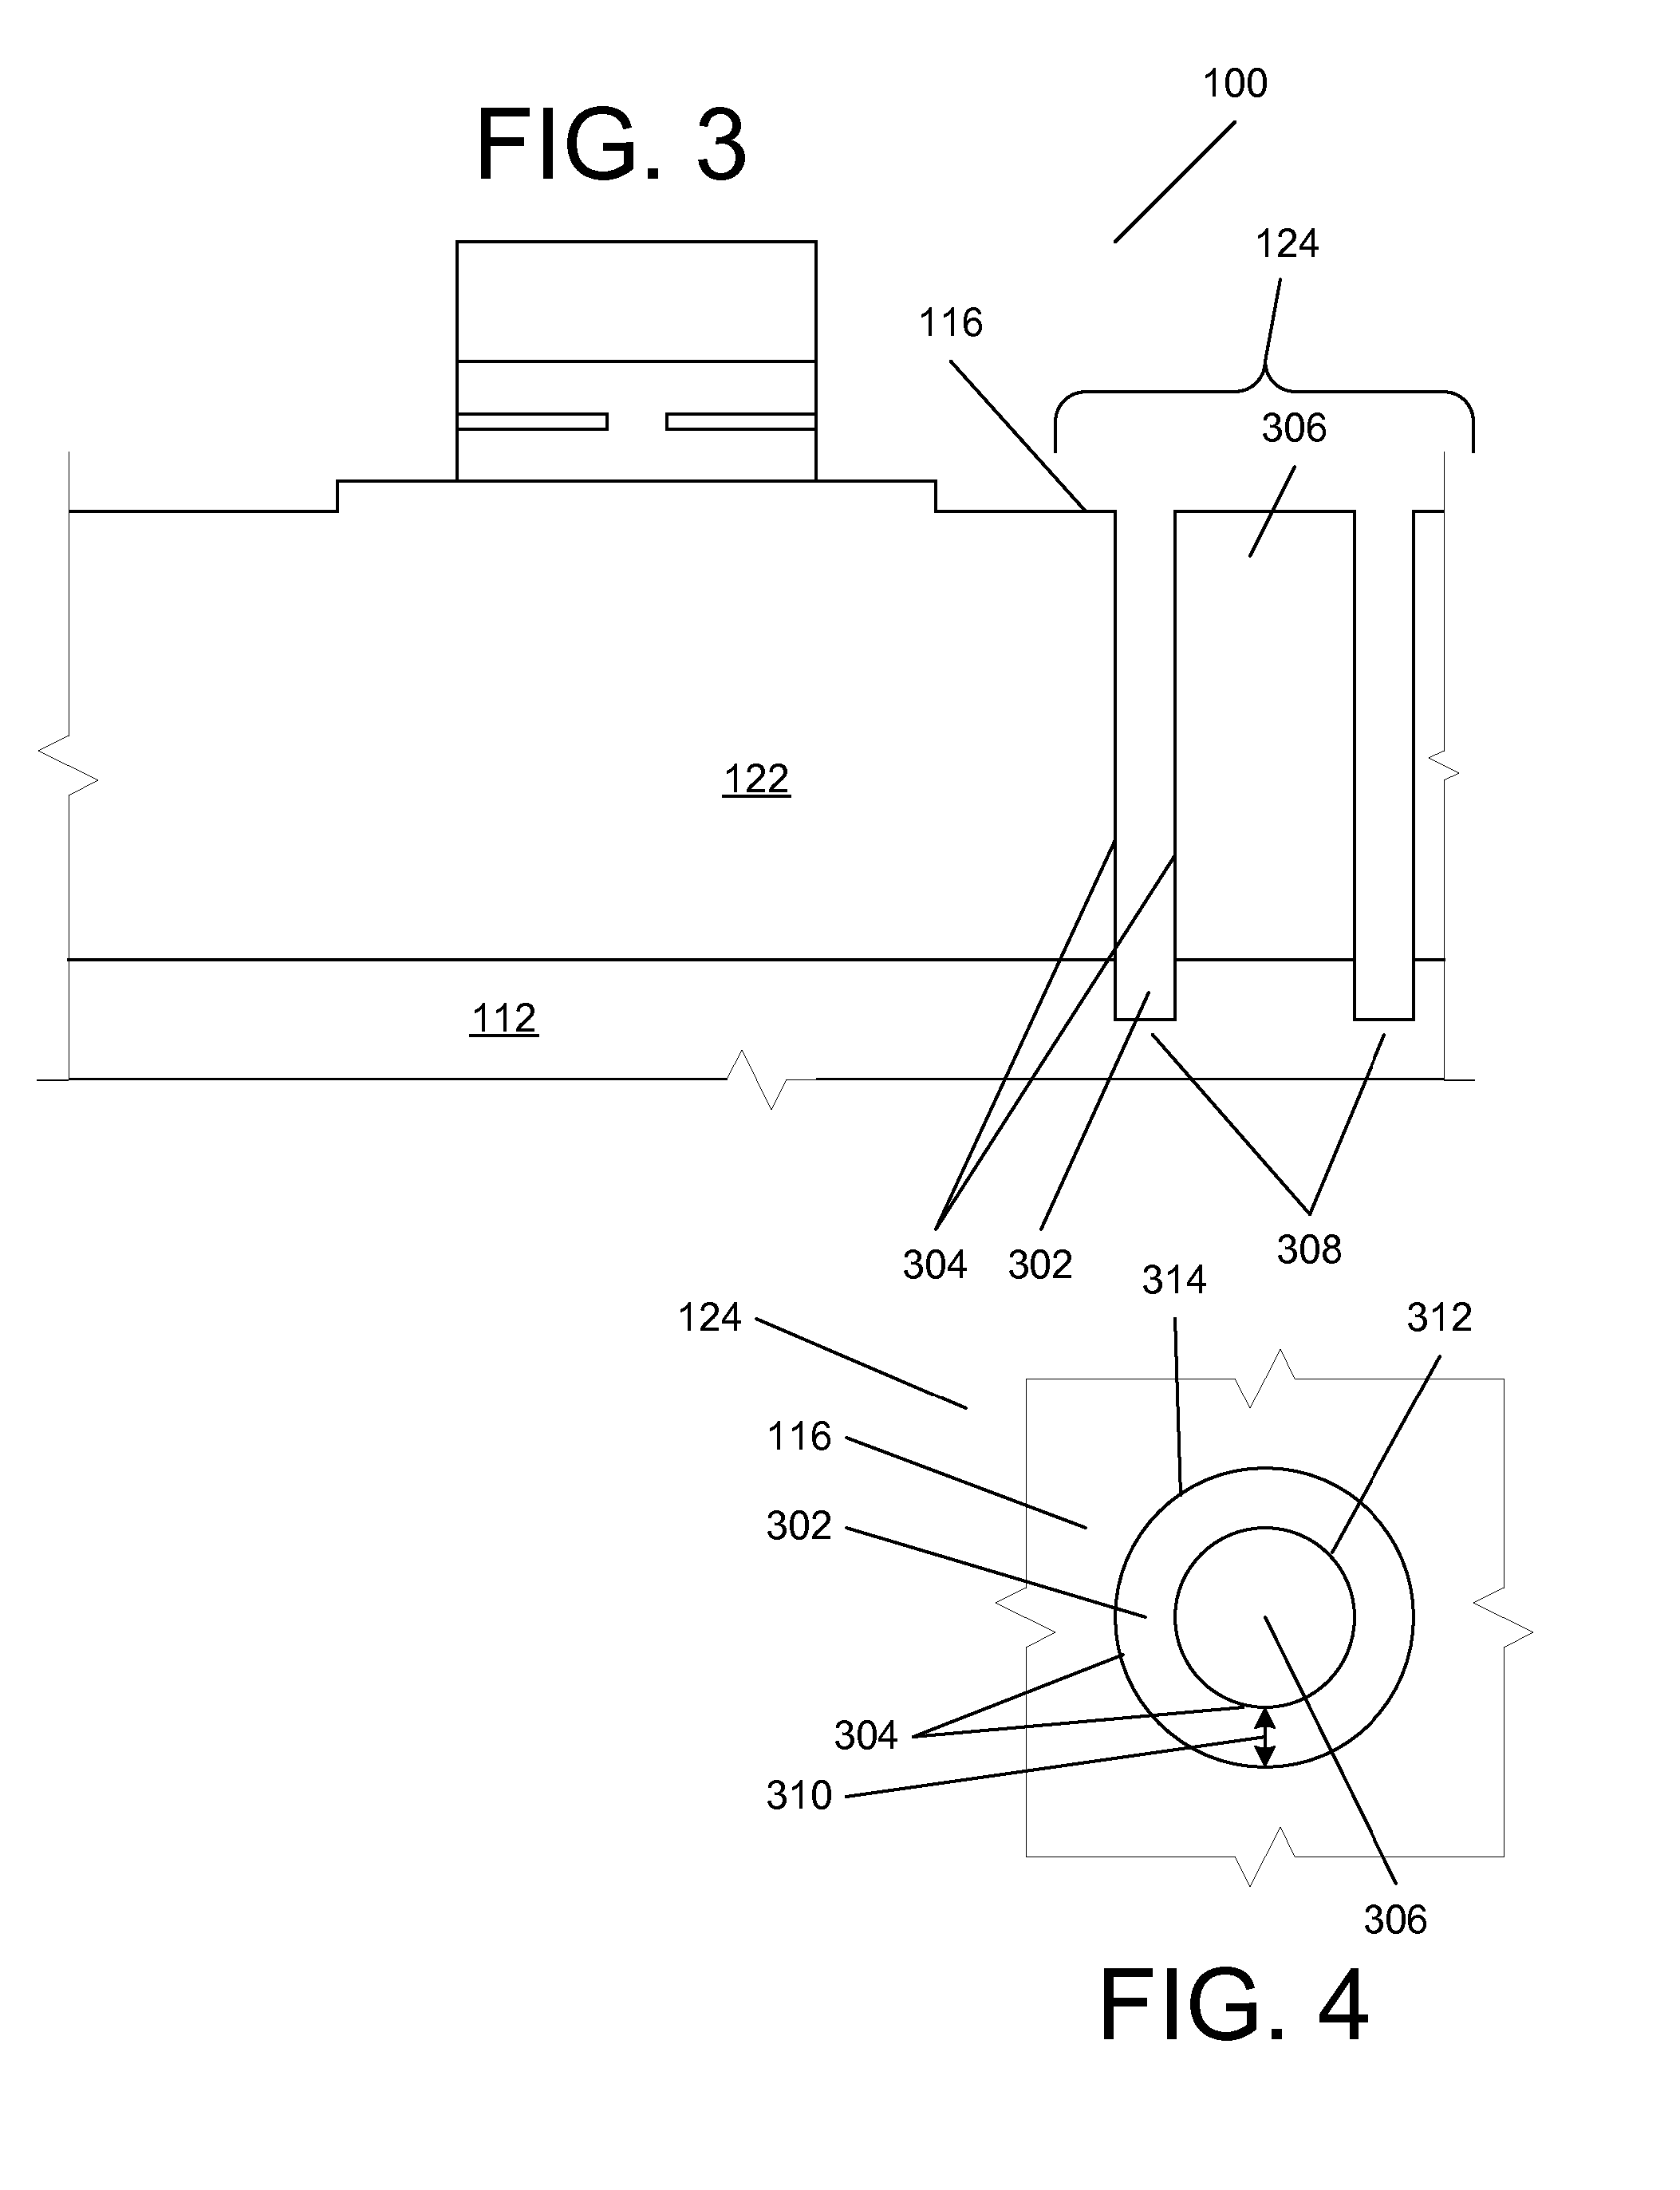 Chip capacitive coupling